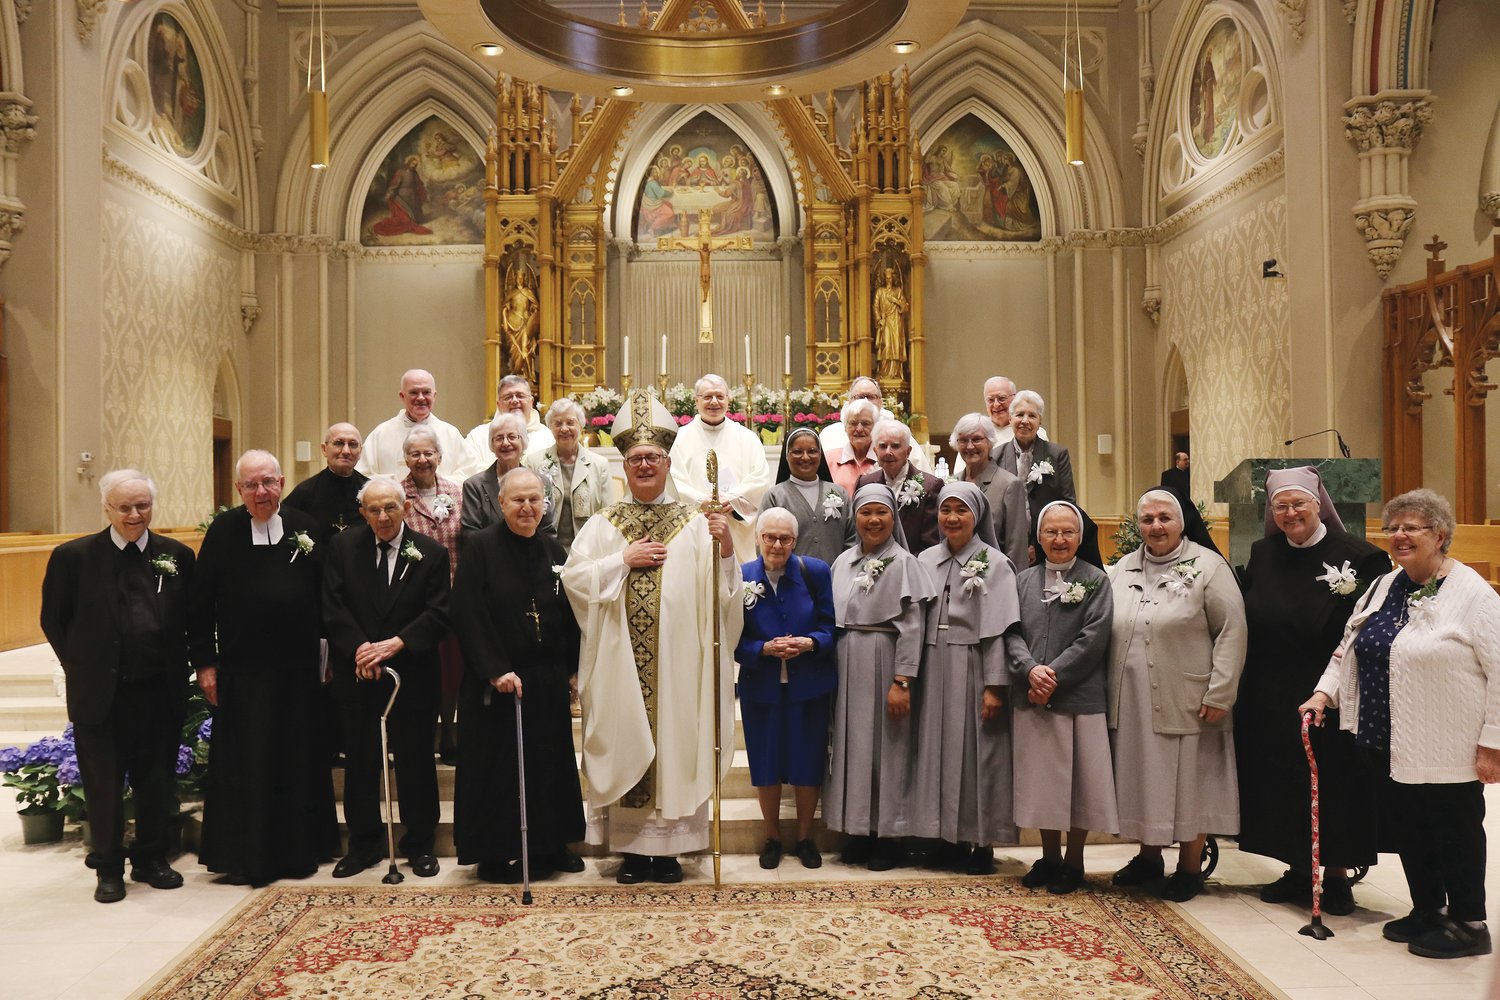 The diocese congratulated the Religious Jubilarians celebrating anniversaries of 80, 75, 70, 65, 60, 55, 50, 45, 40, 35, 30 and 25 years of religious life during Mass on Saturday, April 23, in the Cathedral of Saints Peter and Paul, with Bishop Thomas J. Tobin, serving as celebrant and Father James Sullivan, O.P., serving as homilist.